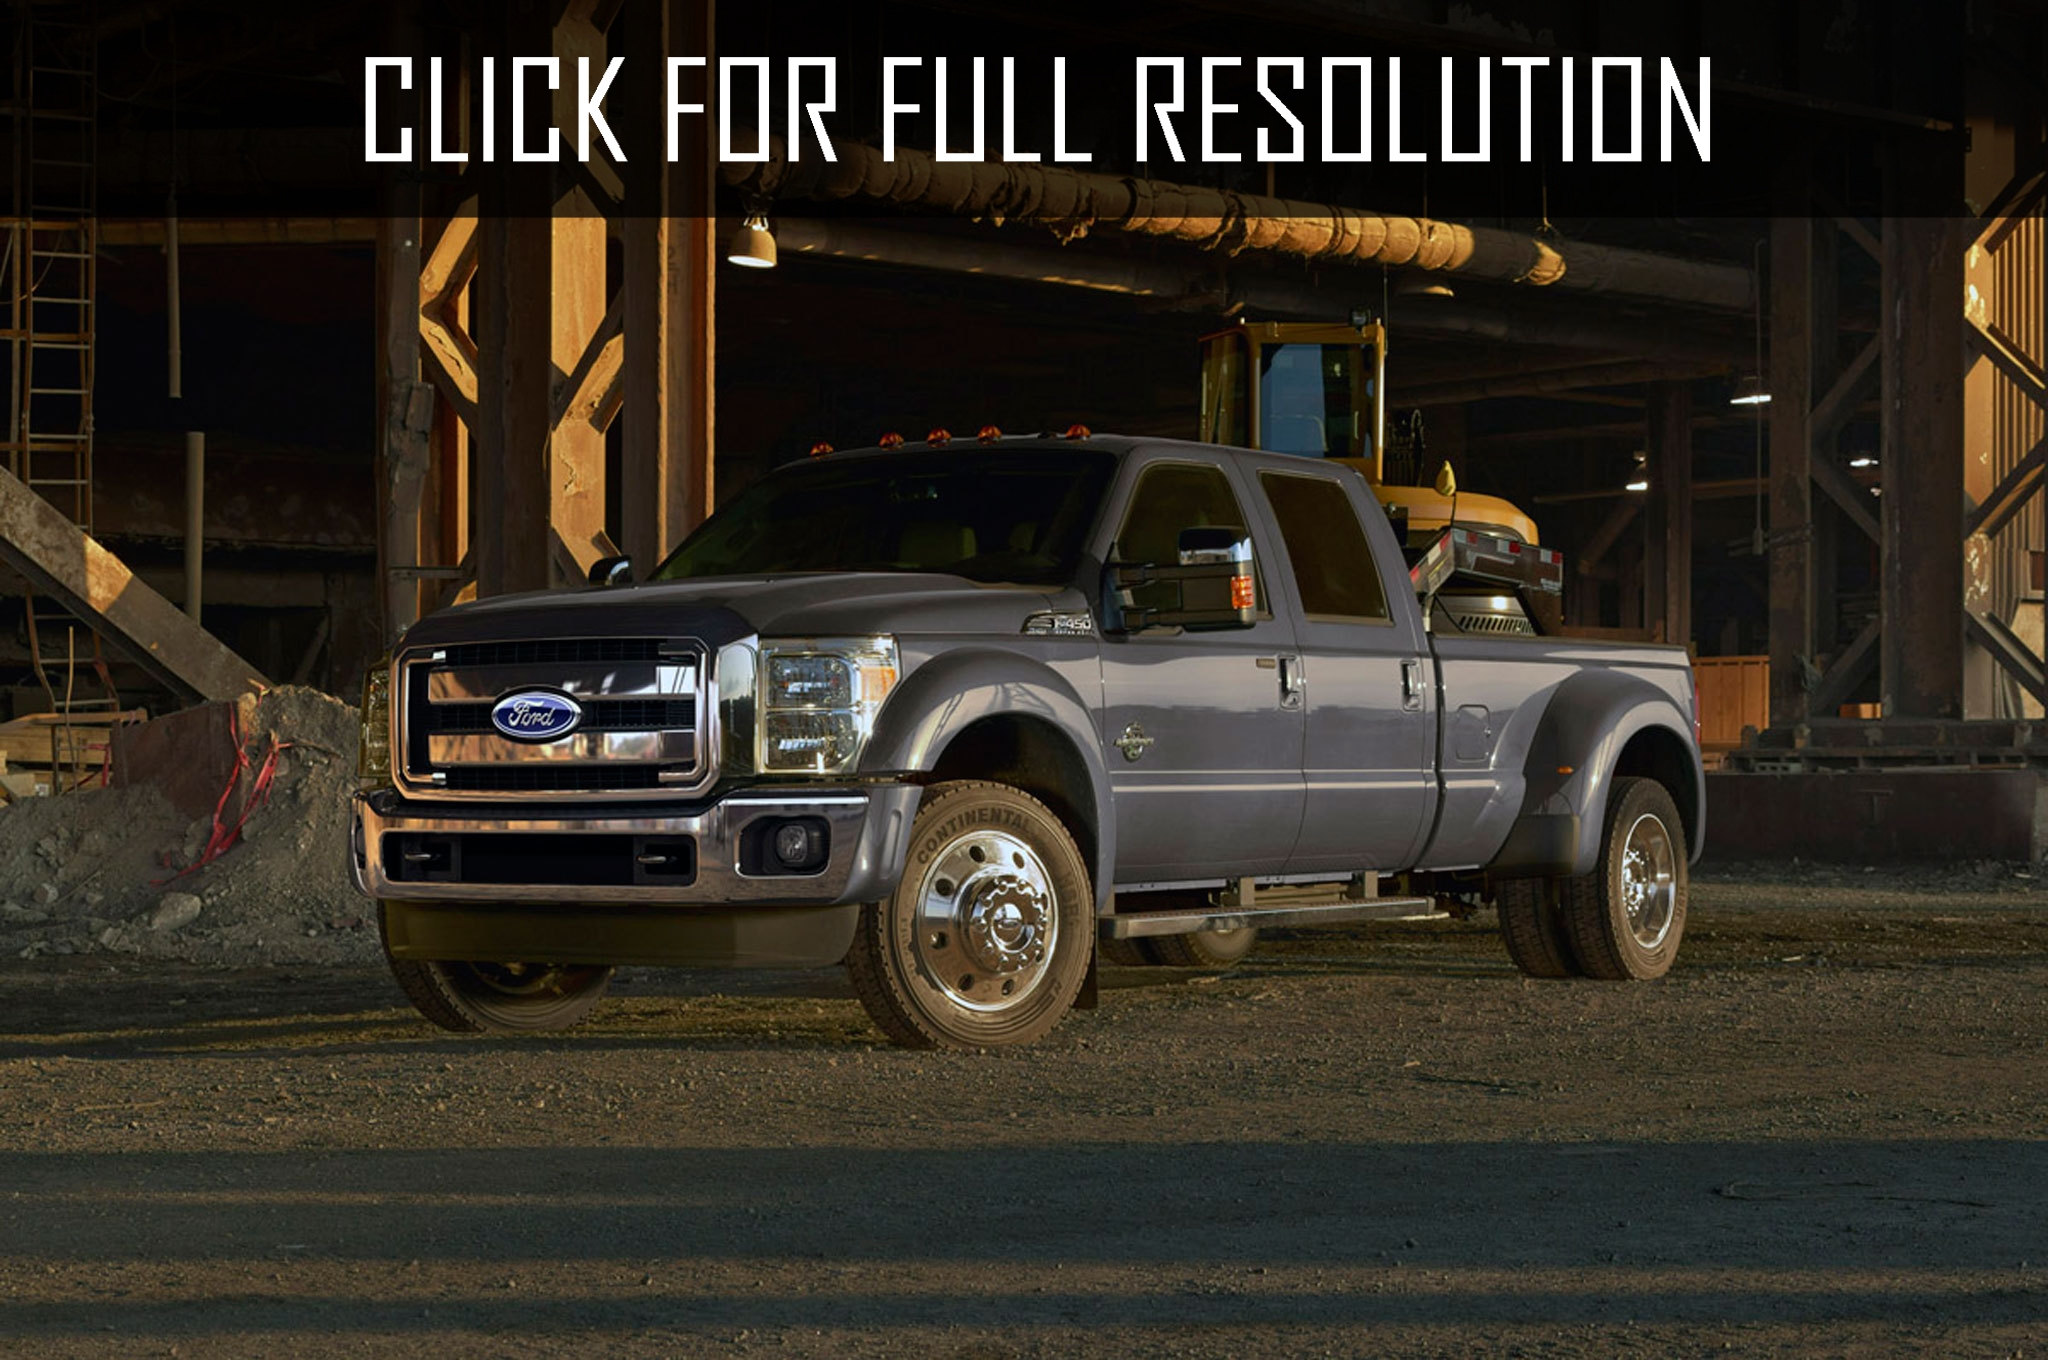 2015 Ford F450